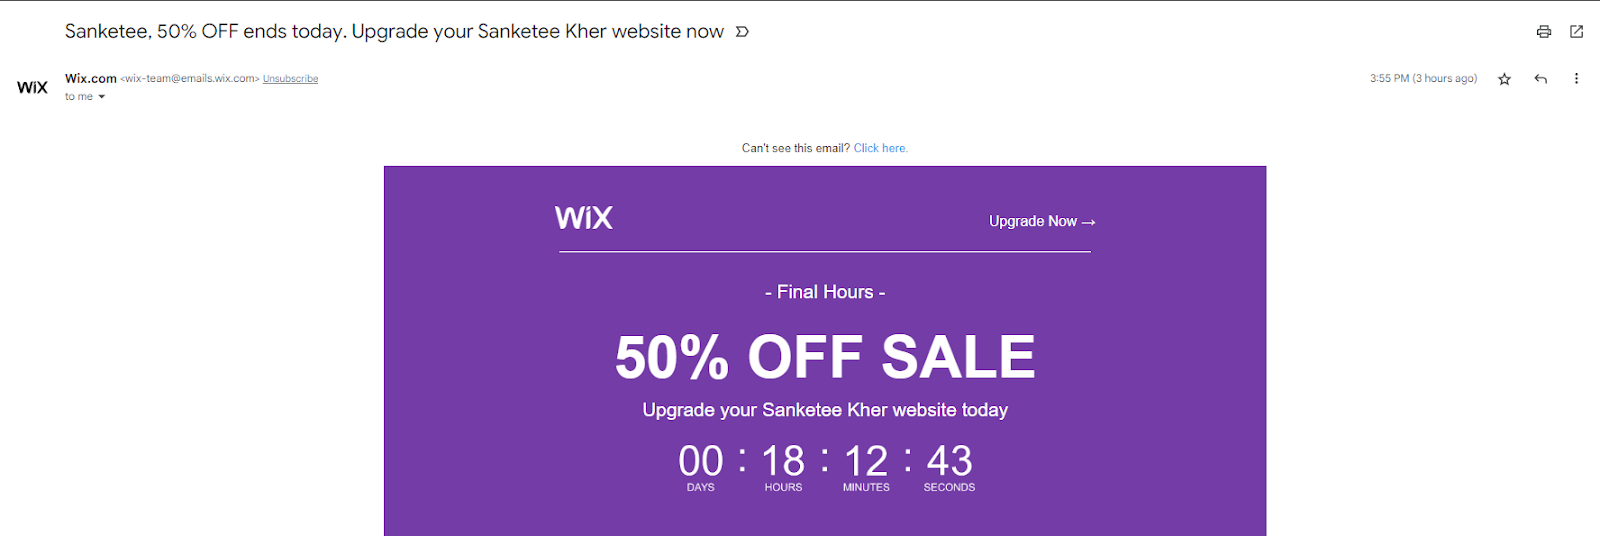 Wix is a stellar example of personalized email marketing